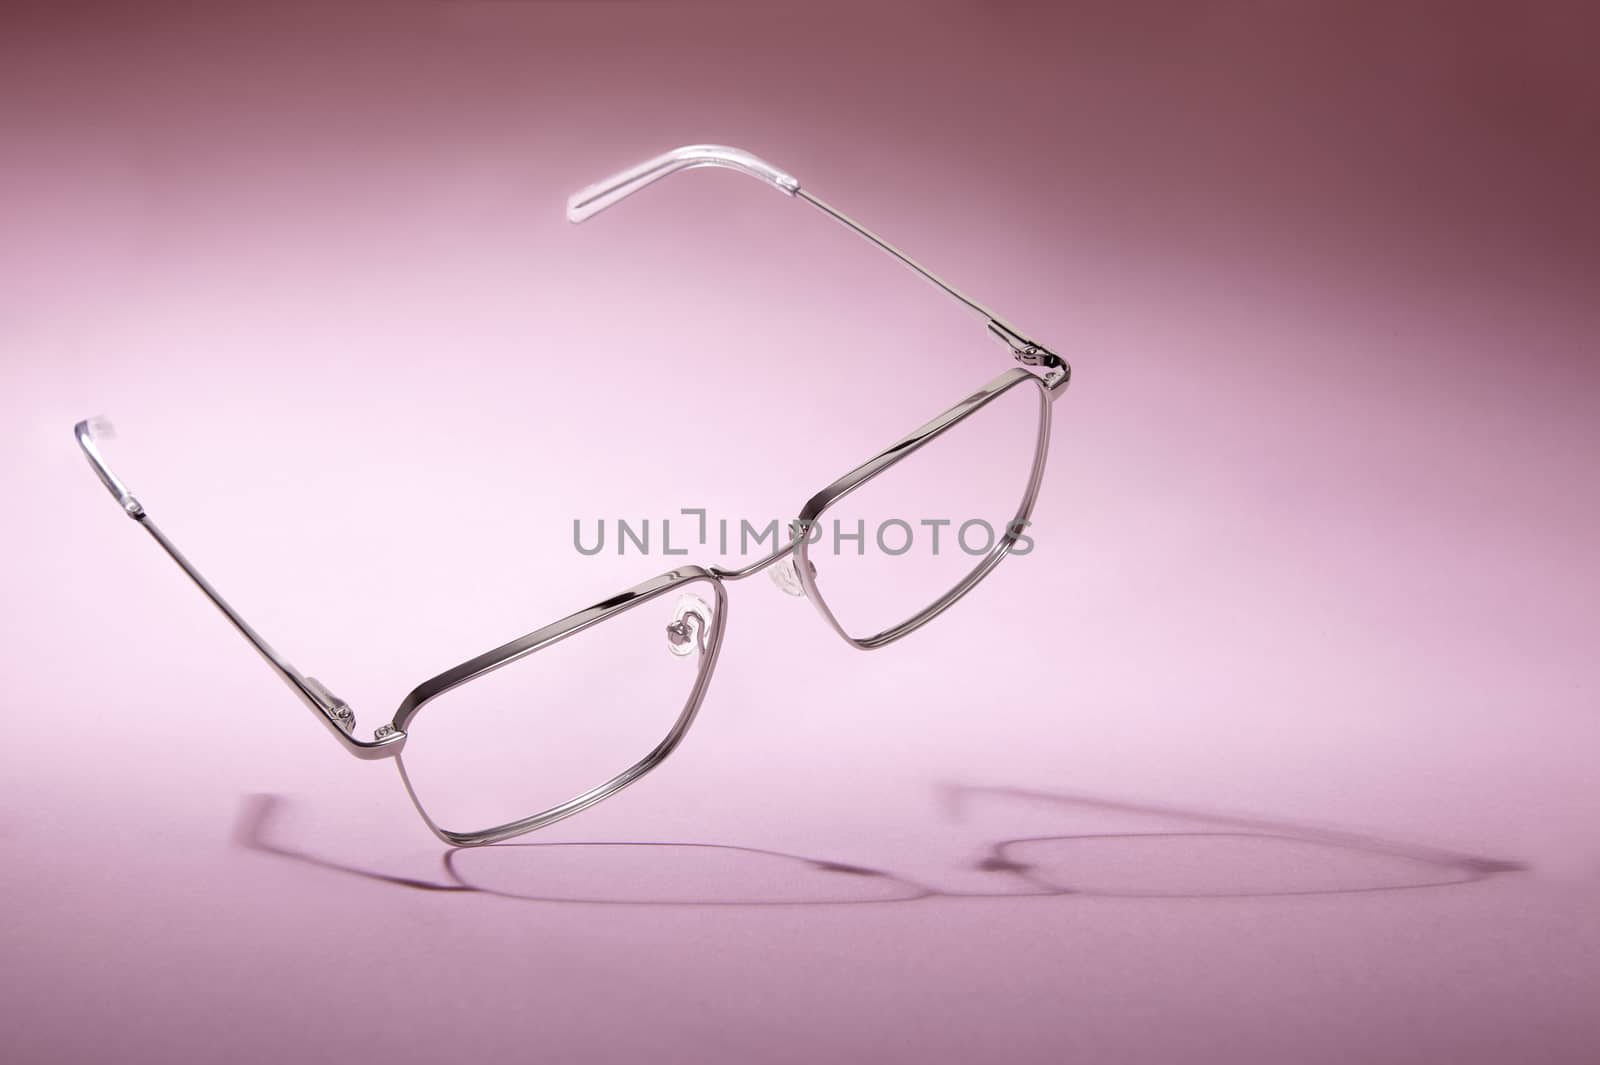 Studio shot of silver glasses at pink background.